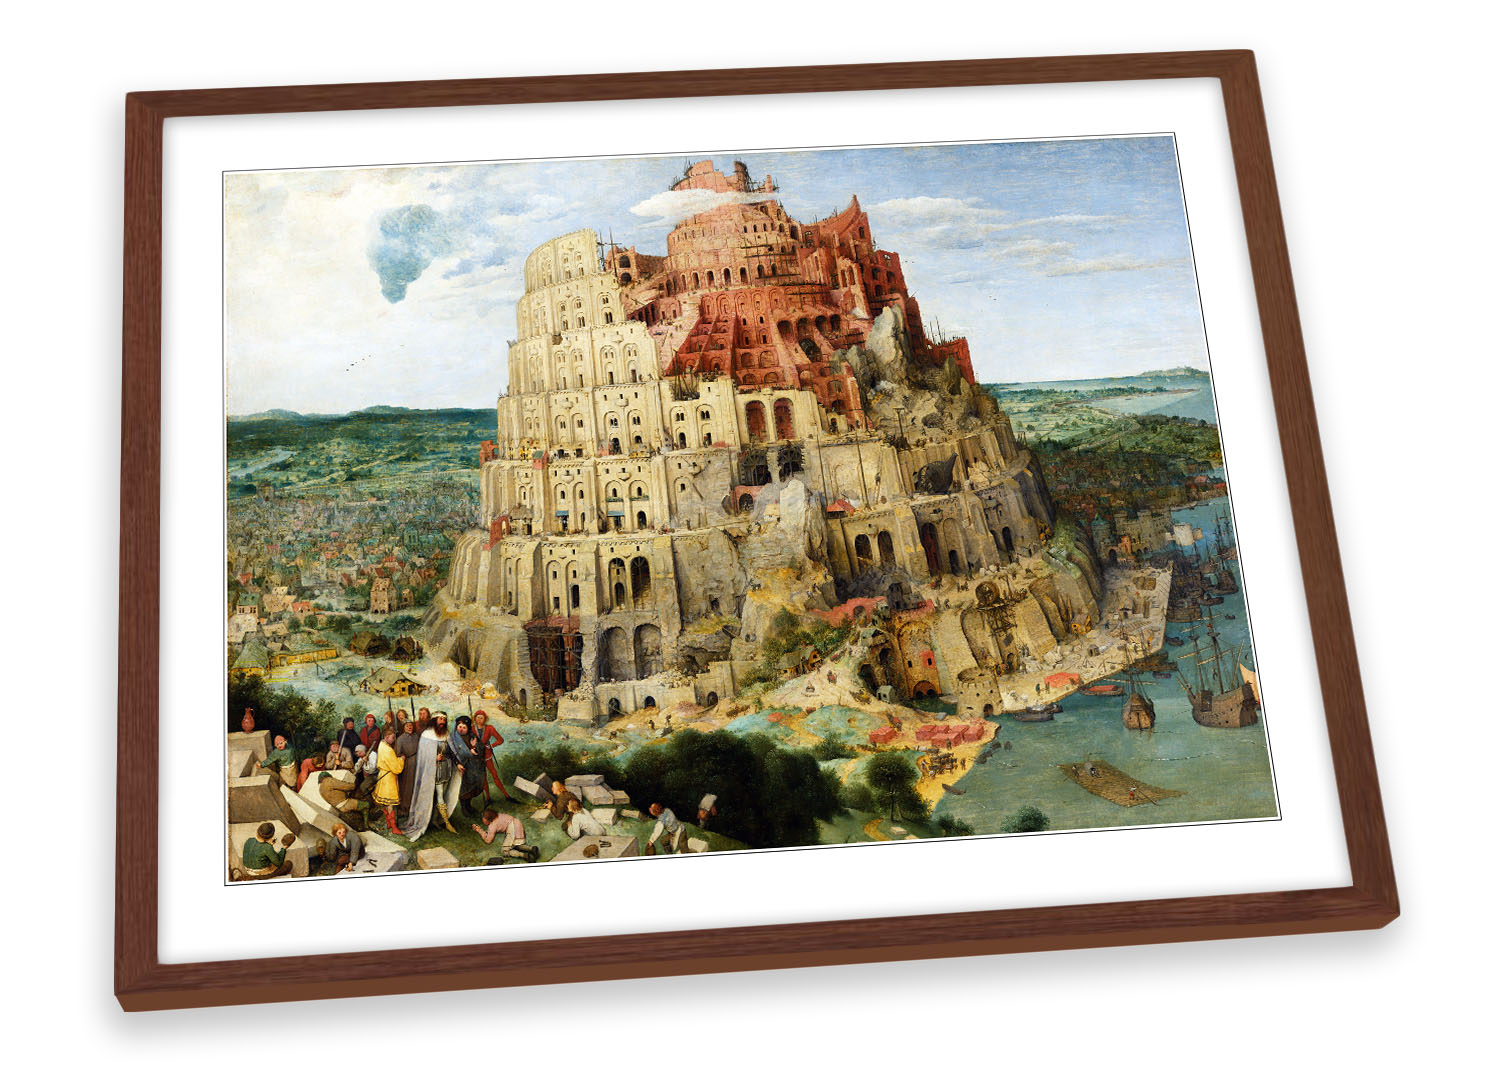 THE TOWER OF BABEL PIETER BRUEGEL PAINTING  ART PRINT  POSTER #3 A3/A4 SIZE 